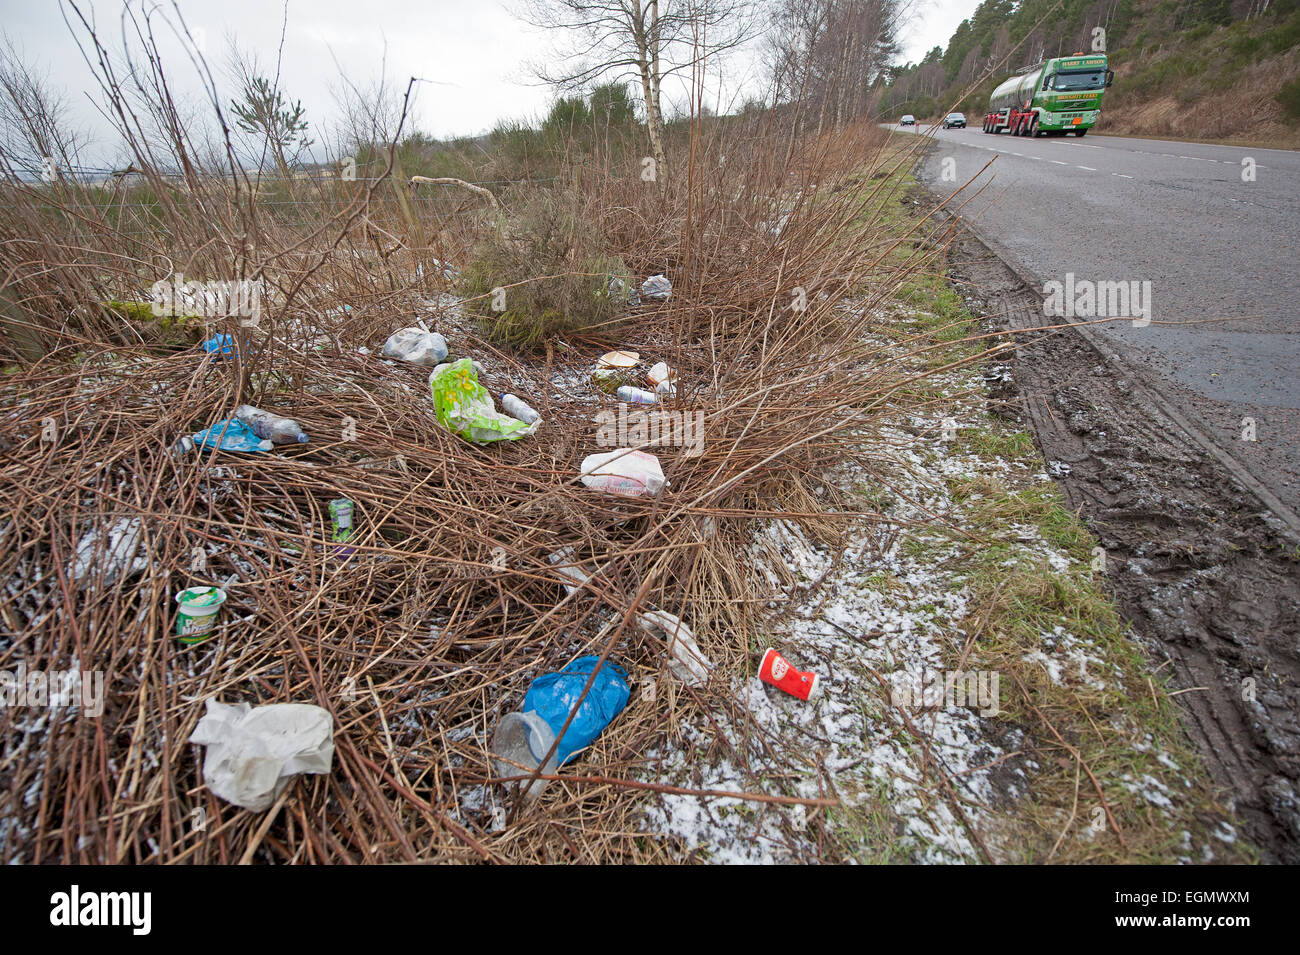 Discarded lay-by roadside litter on the A95 trunk road, so much for keep Scotland beautiful campaign.   SCO 9591. Stock Photo